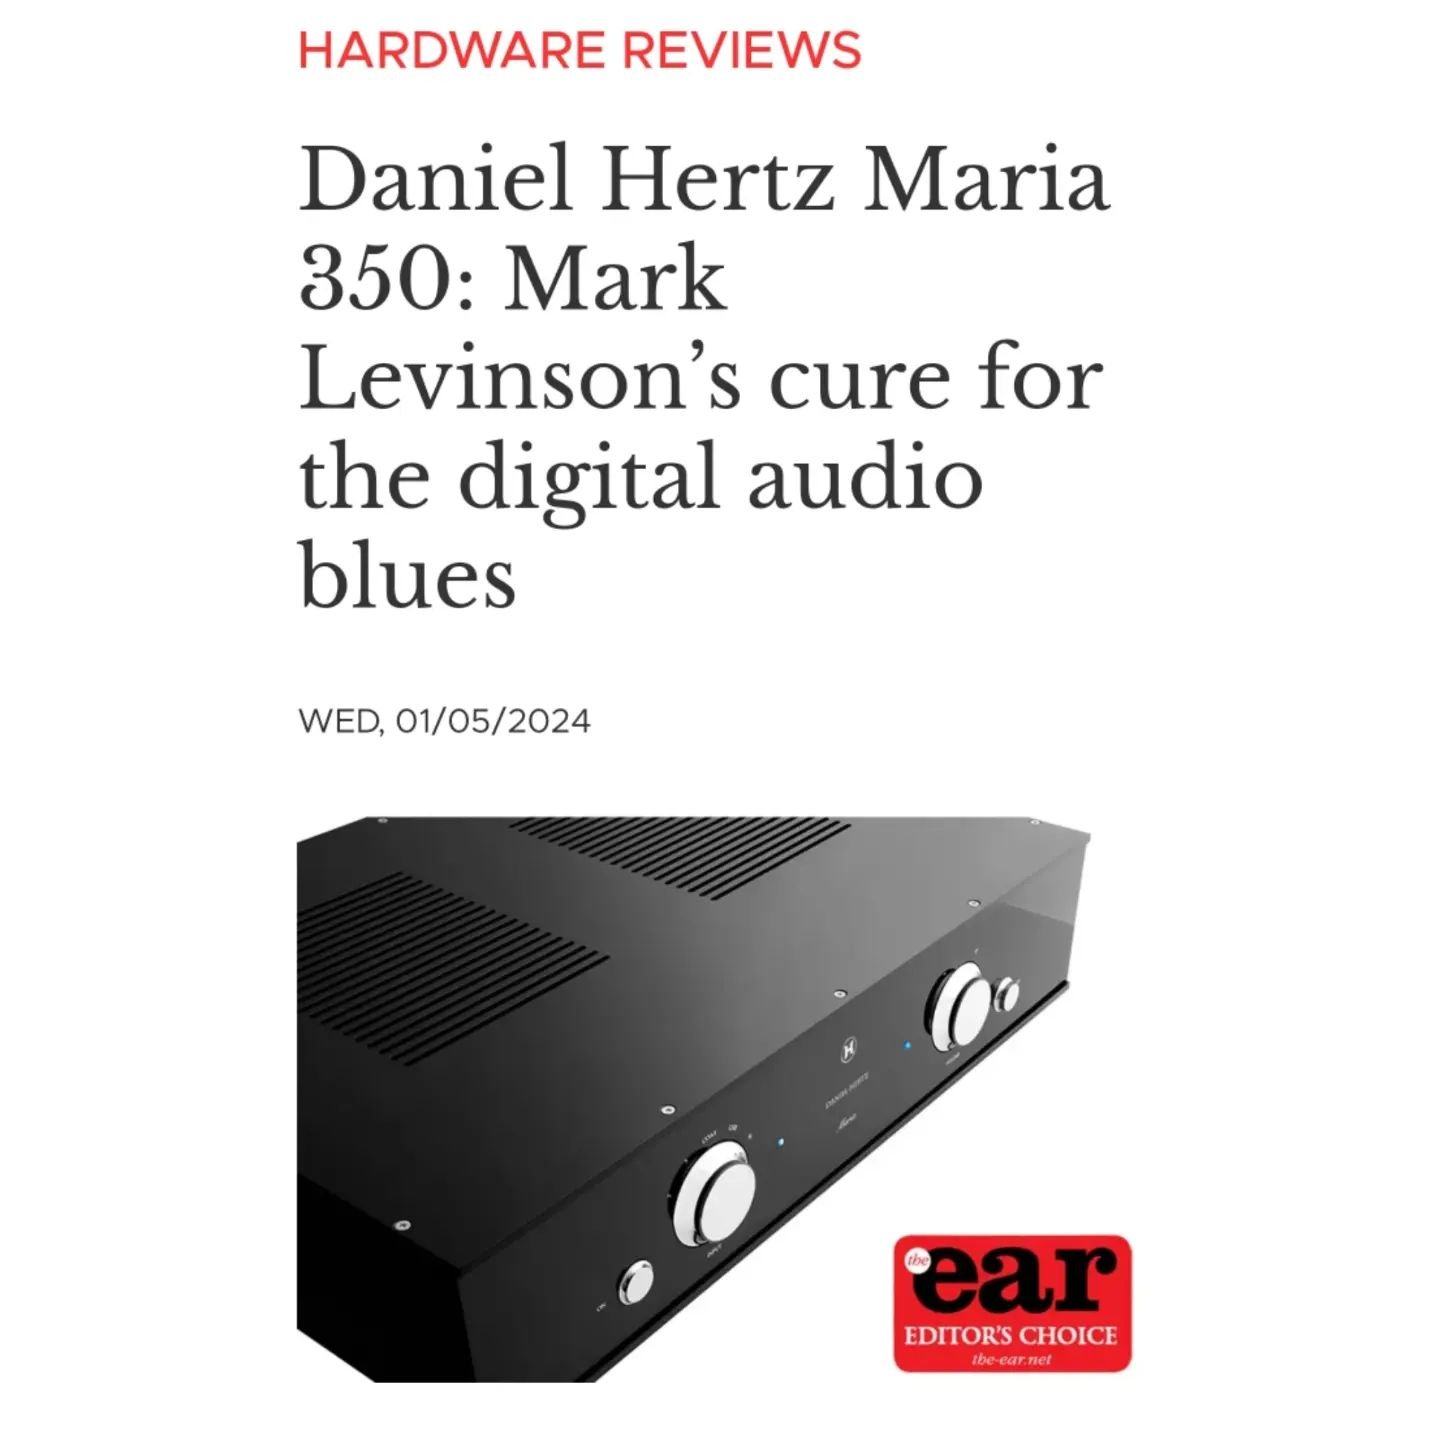 The first UK review of the @danielhertz_uk Maria 350 integrated amplifier at The Ear has received 'Editor's Choice' from Jason Kennedy.

&quot;This amp has the nimbleness of a single ended triode tube amp combined with the sort of power that 350W can